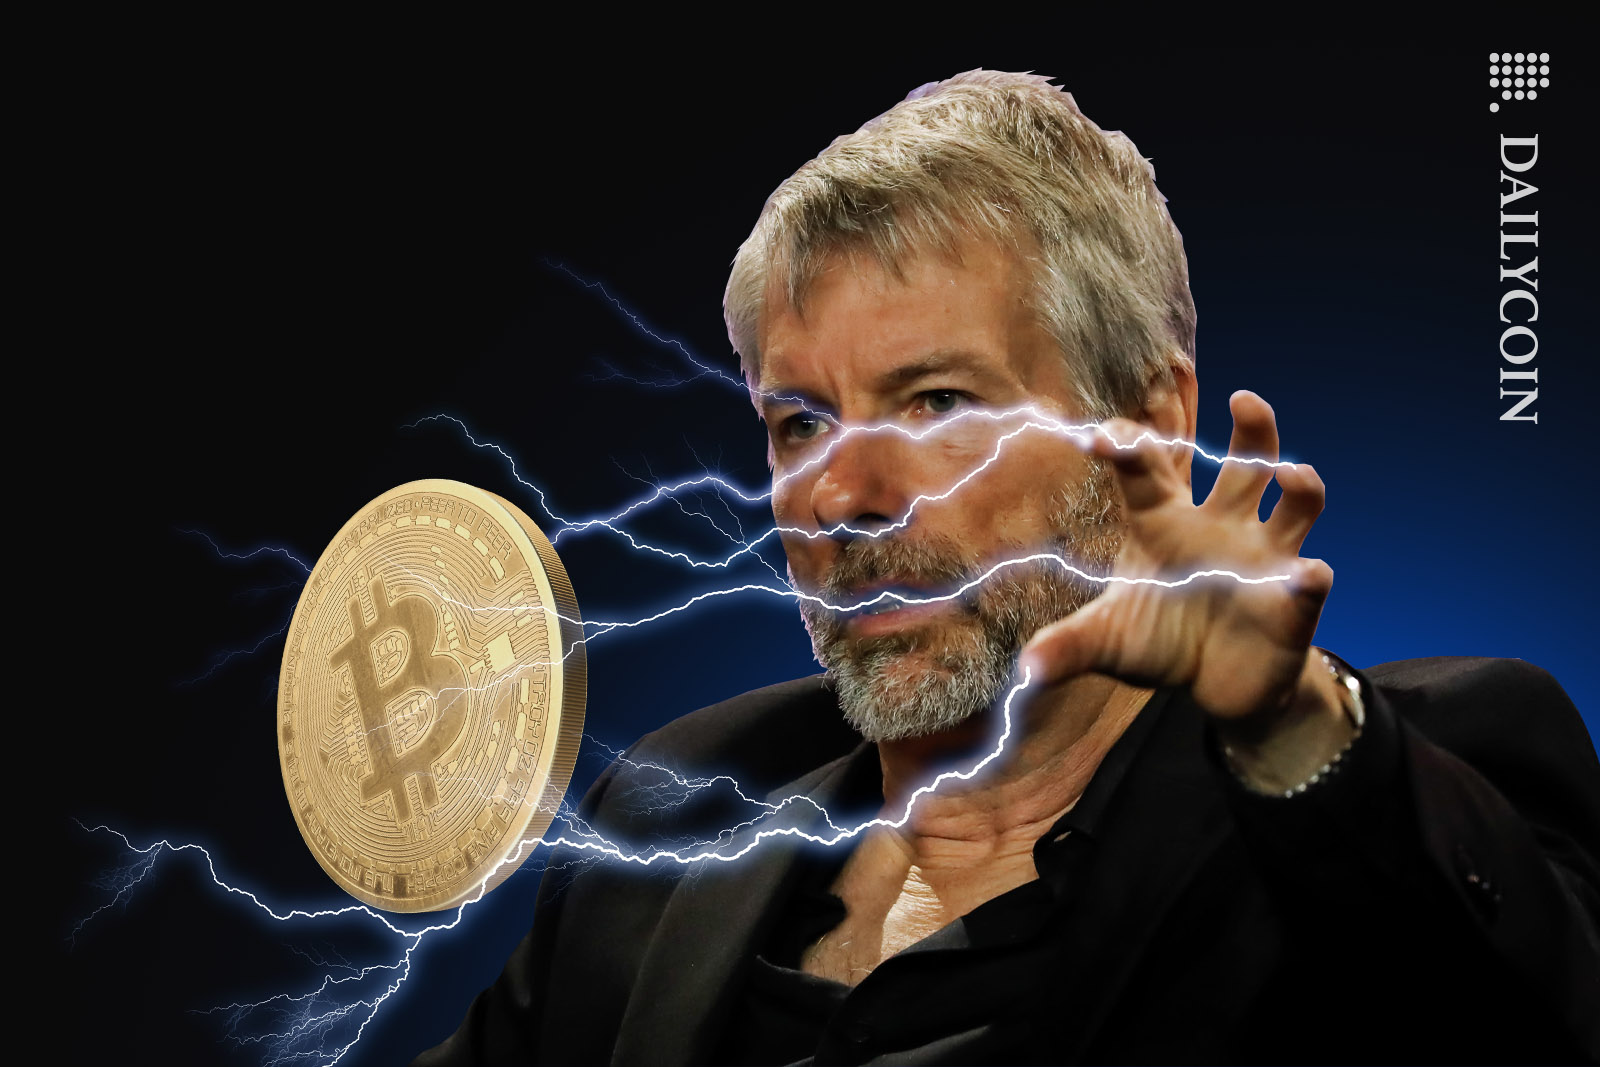 Michael Saylor holding a bitcoin using telekinetic and electrokinetic powers.